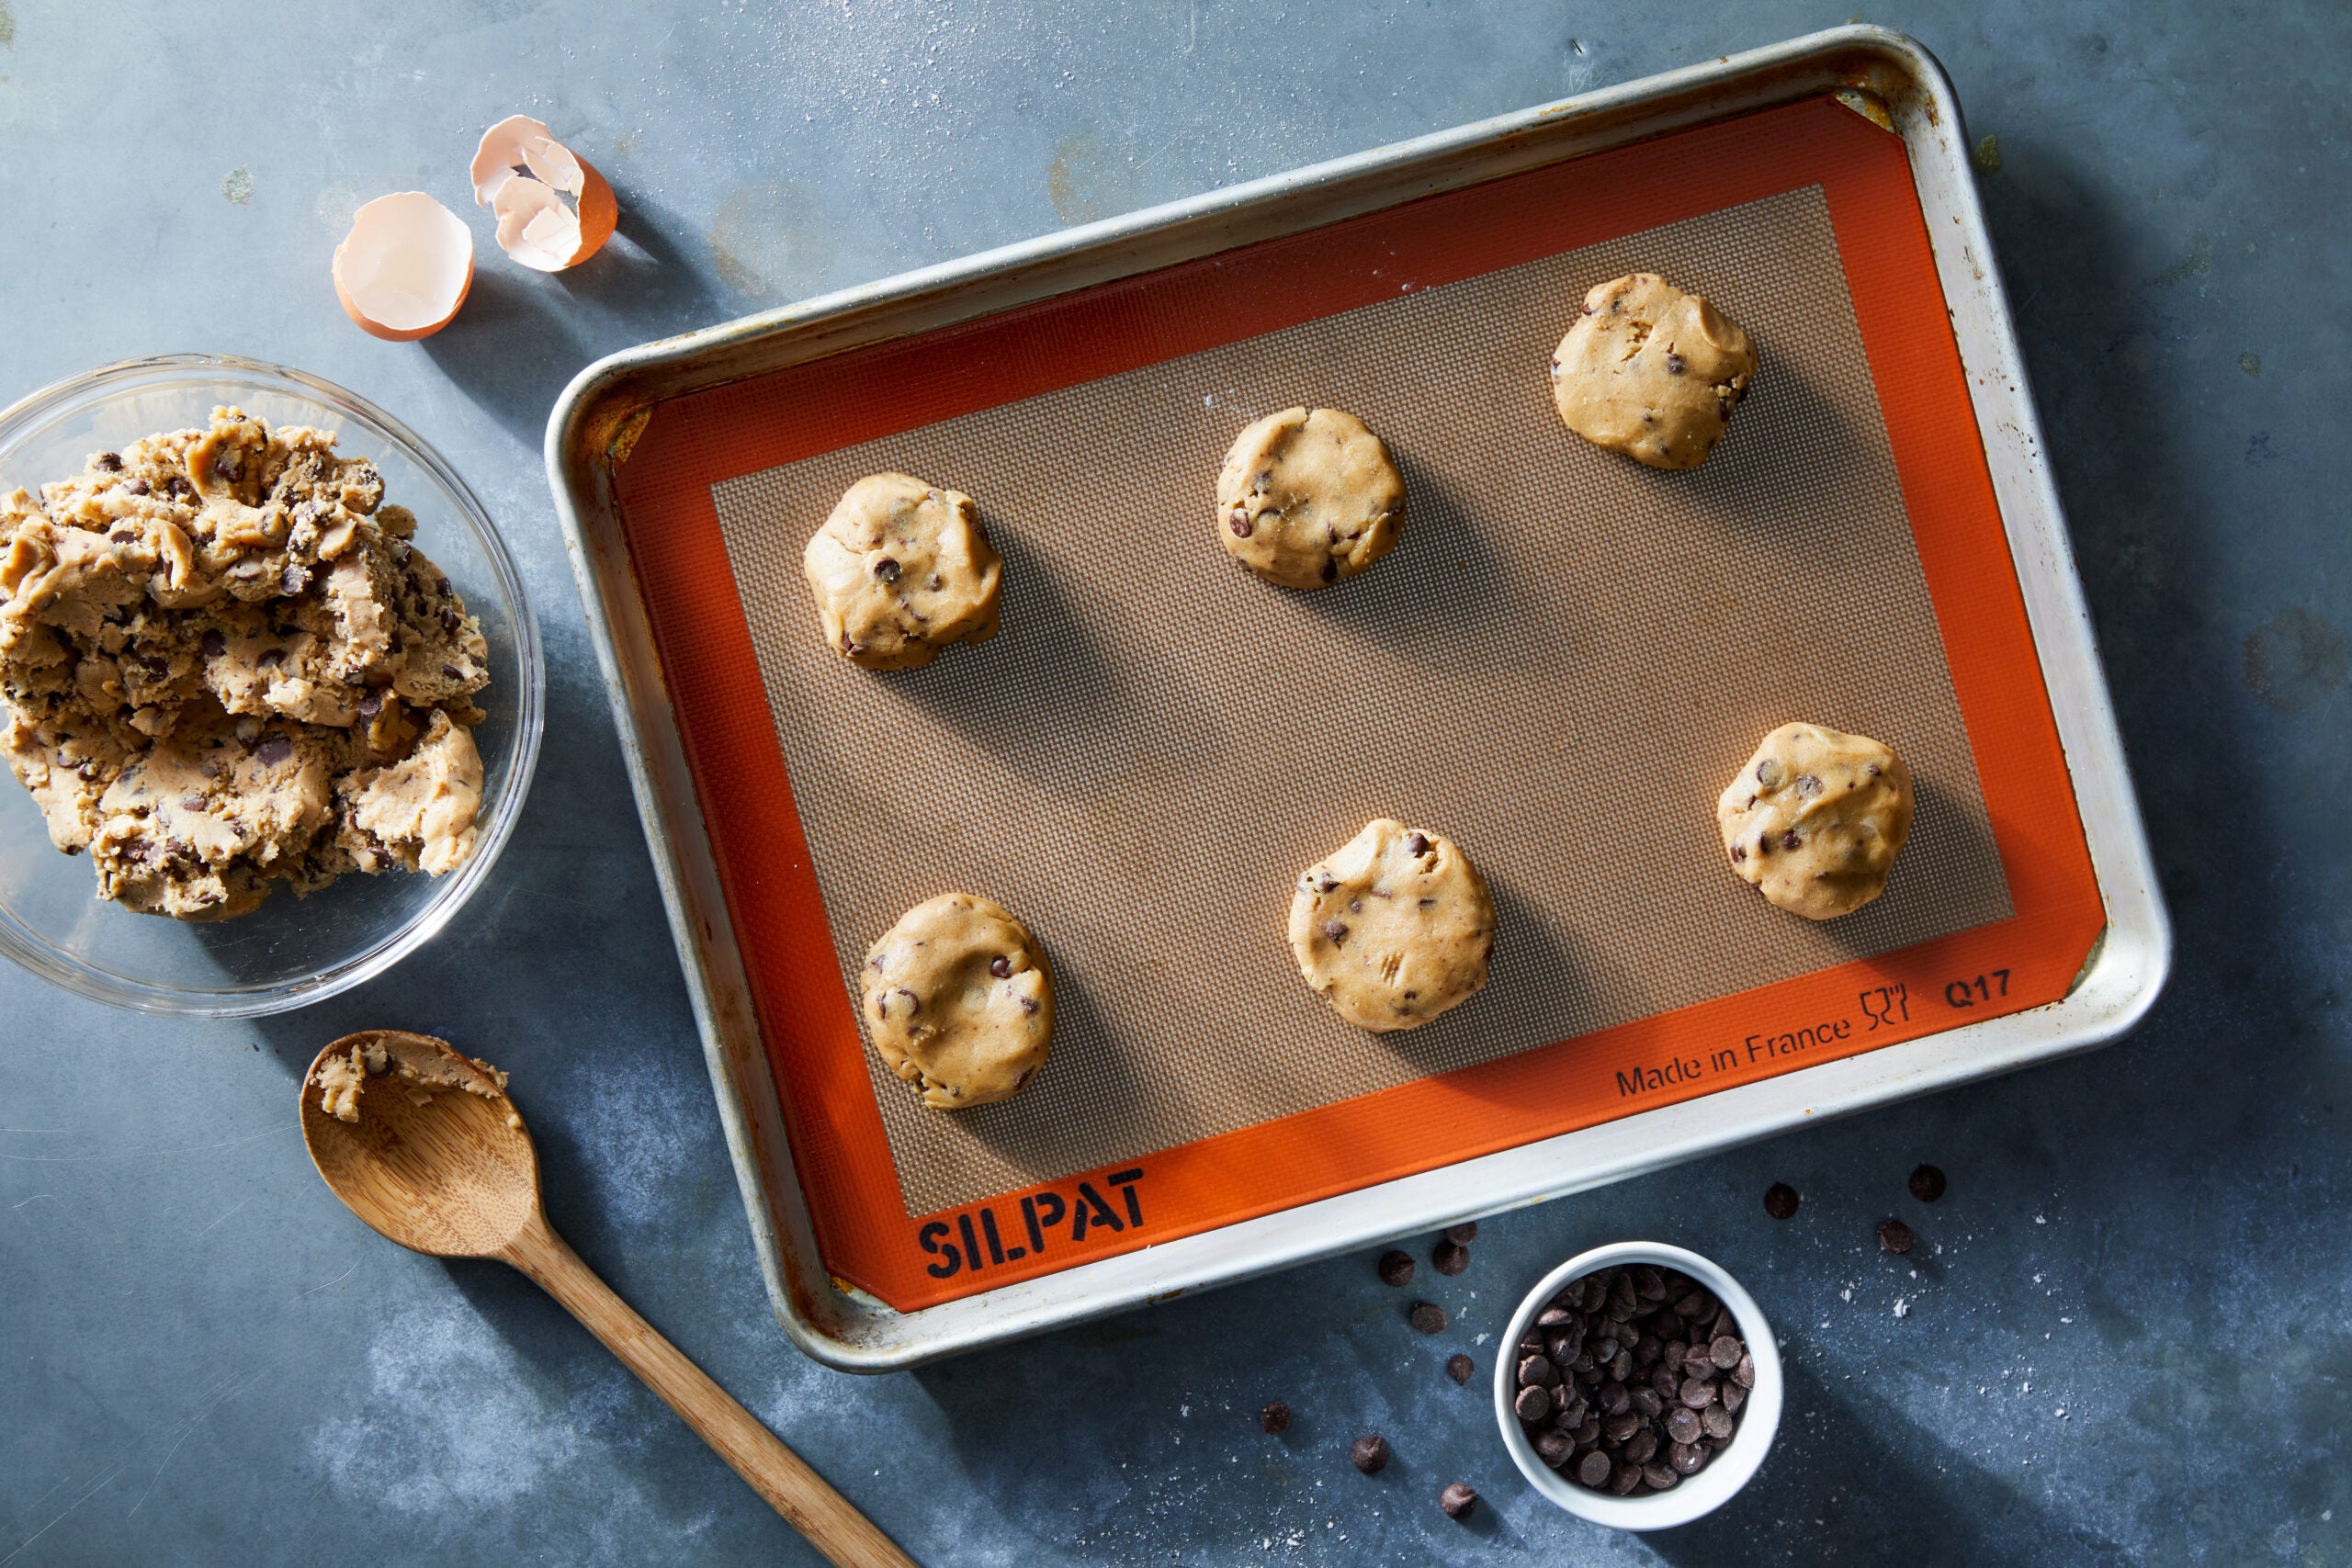 These Silicone Baking Liners Have 60,000 Five-Star Ratings